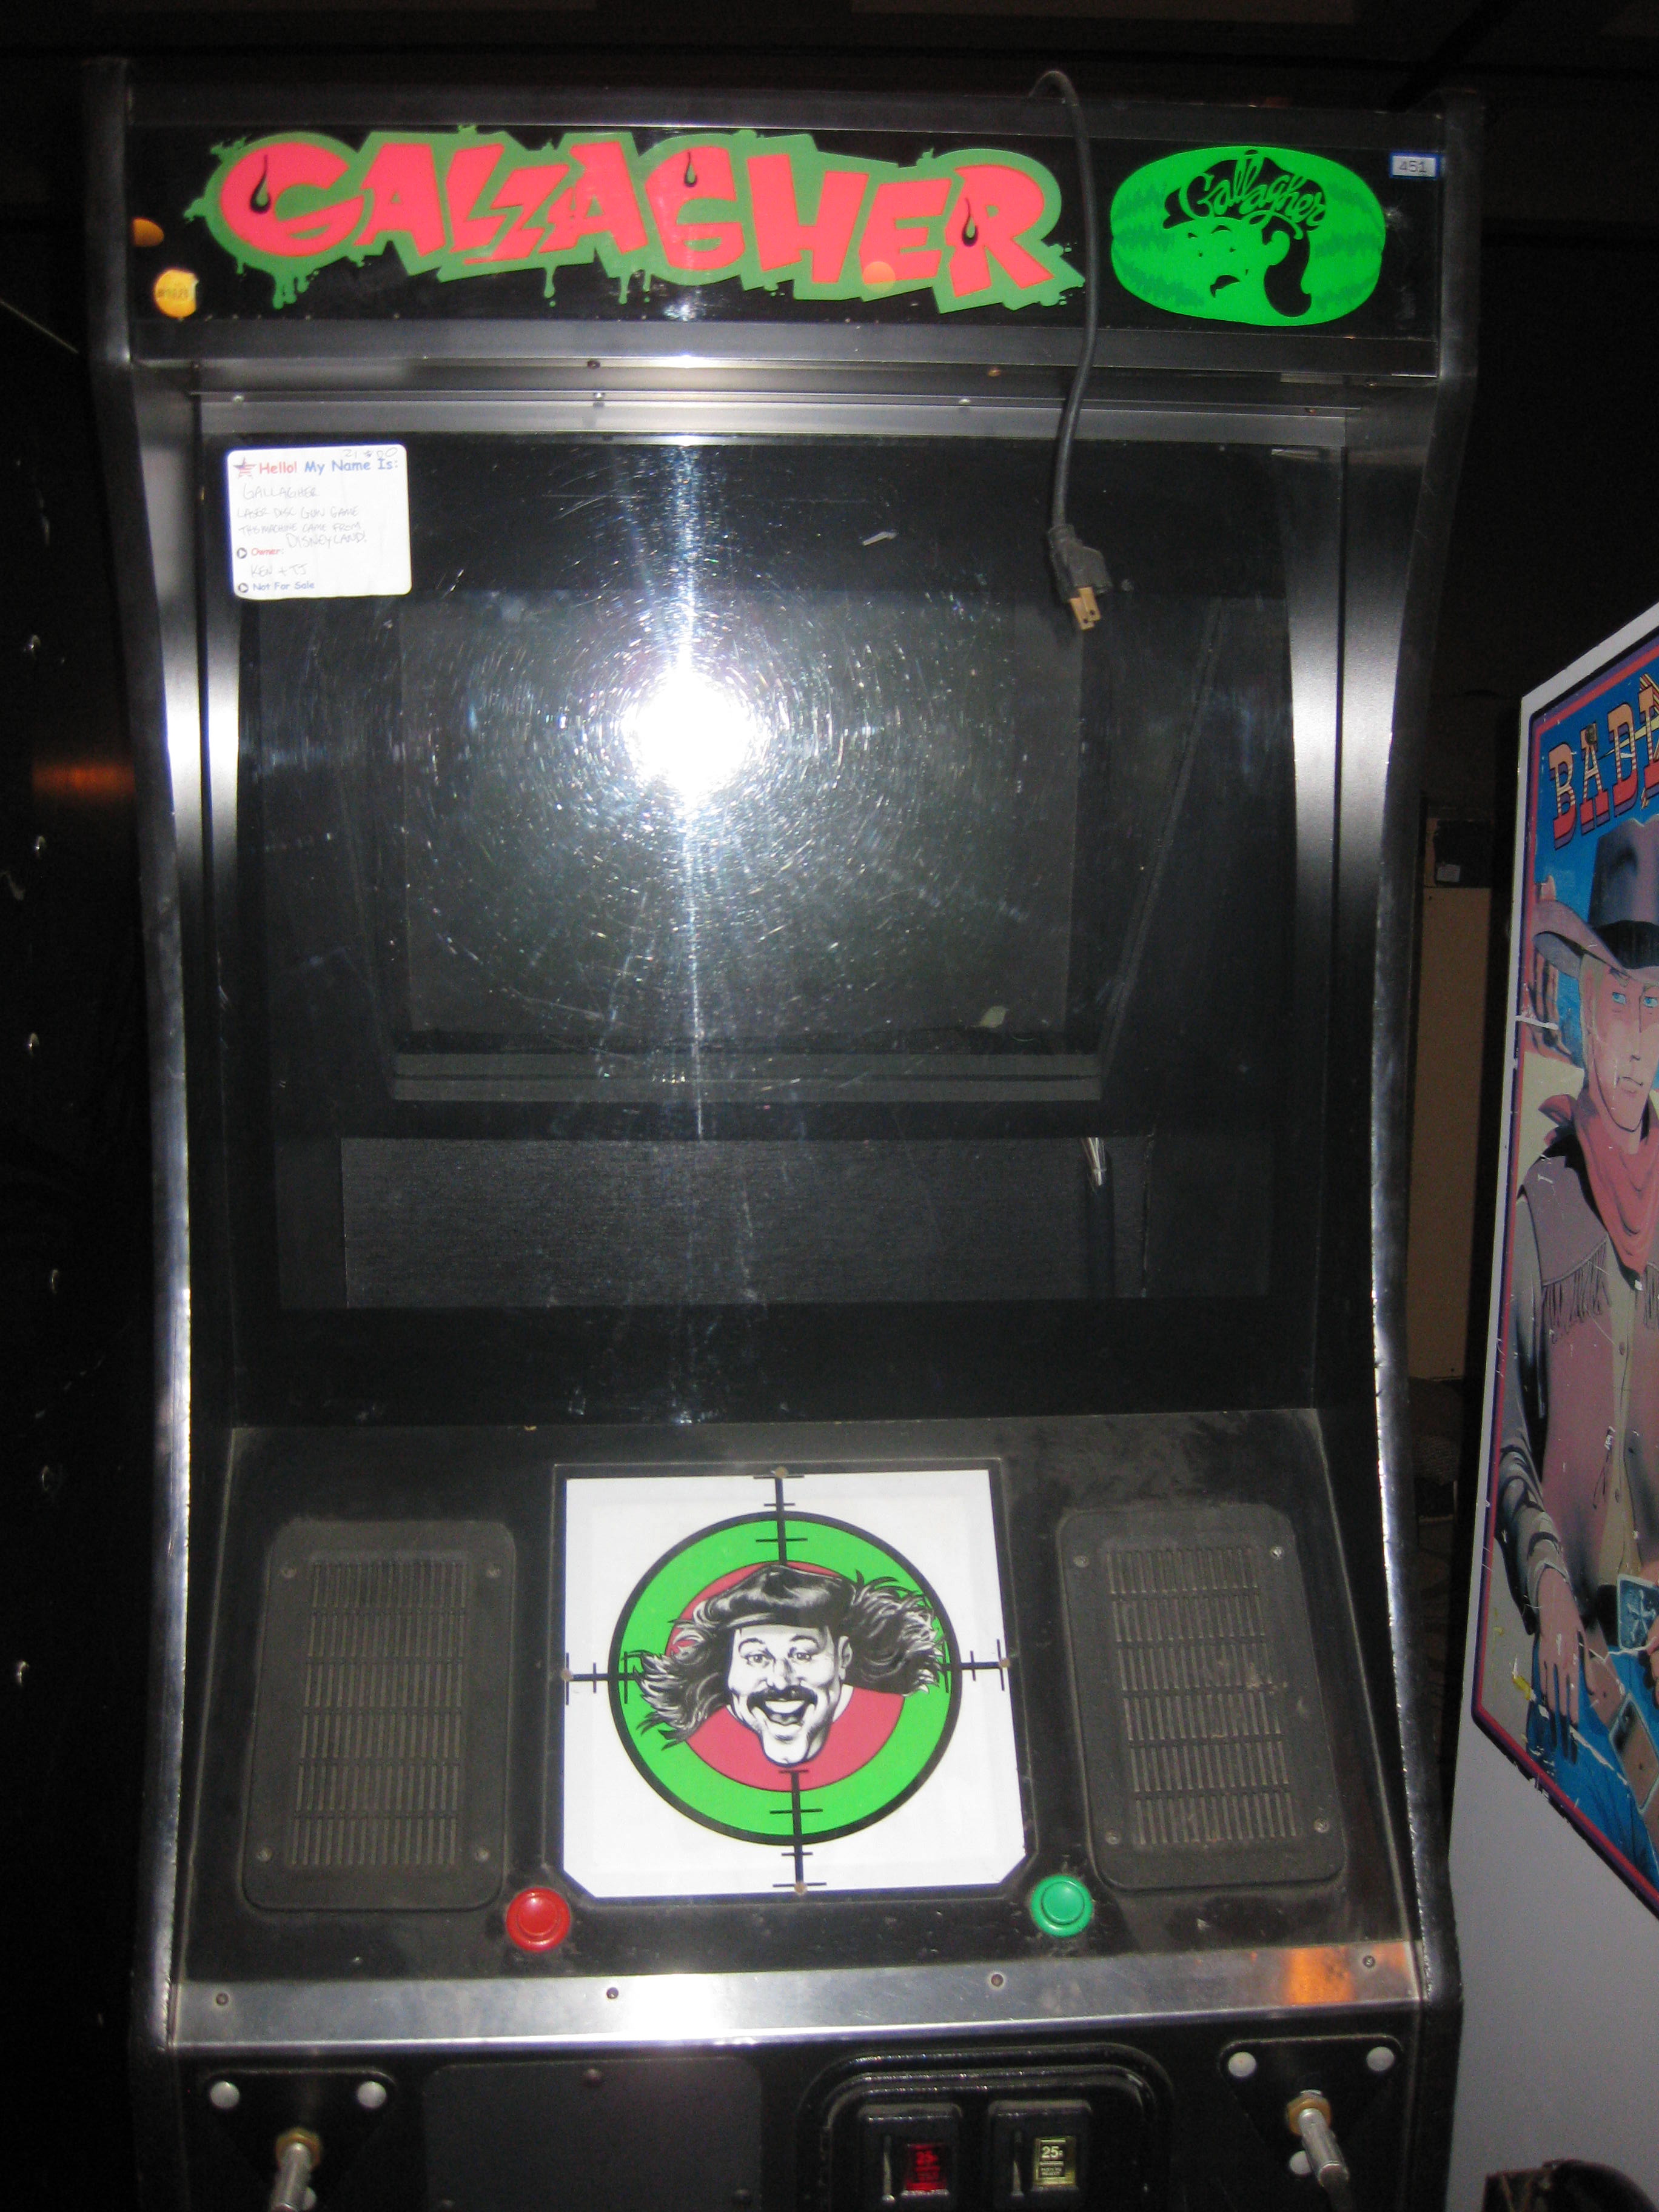 Where else are you gonna find a Gallagher arcade machine?  